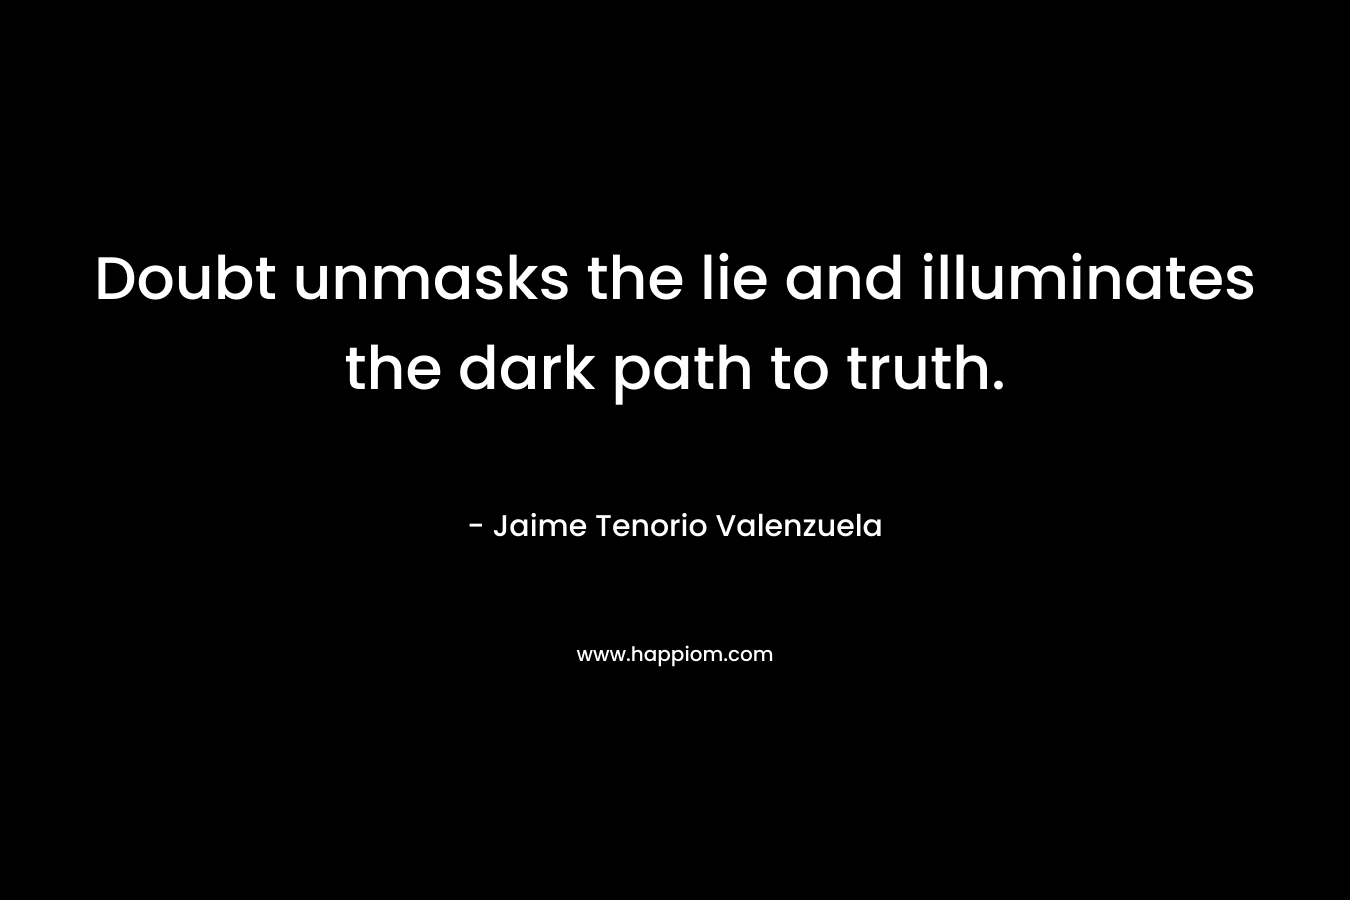 Doubt unmasks the lie and illuminates the dark path to truth.